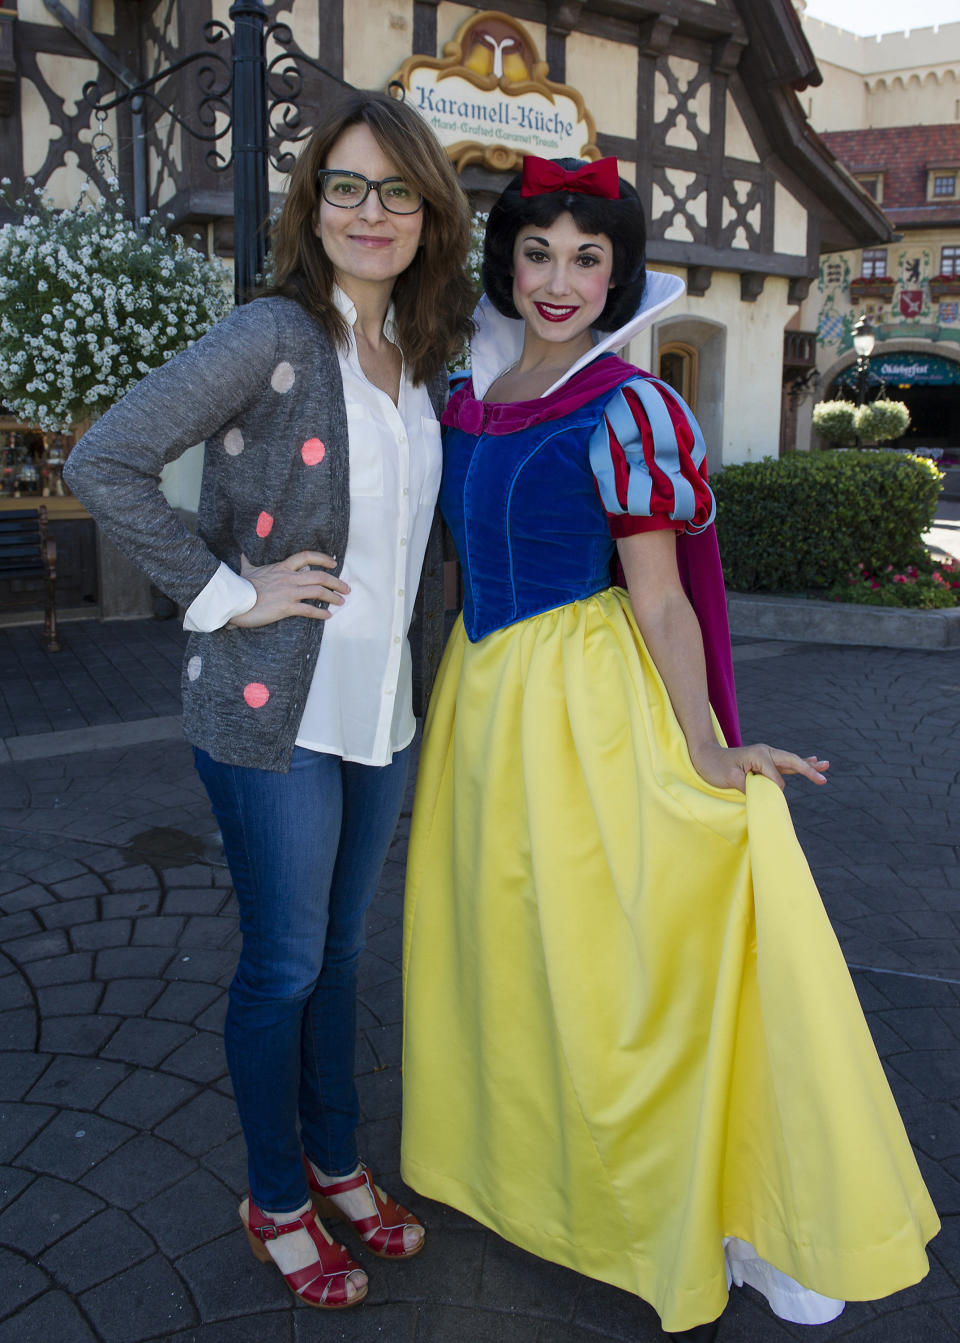 Tina Fey poses with Snow White in the Germany pavilion at Epcot February 18, 2013 in Lake Buena Vista, Florida.  Epcot is one of four theme parks at the Walt Disney World Resort.  (Photo by Gene Duncan/Disney Parks via Getty Images)